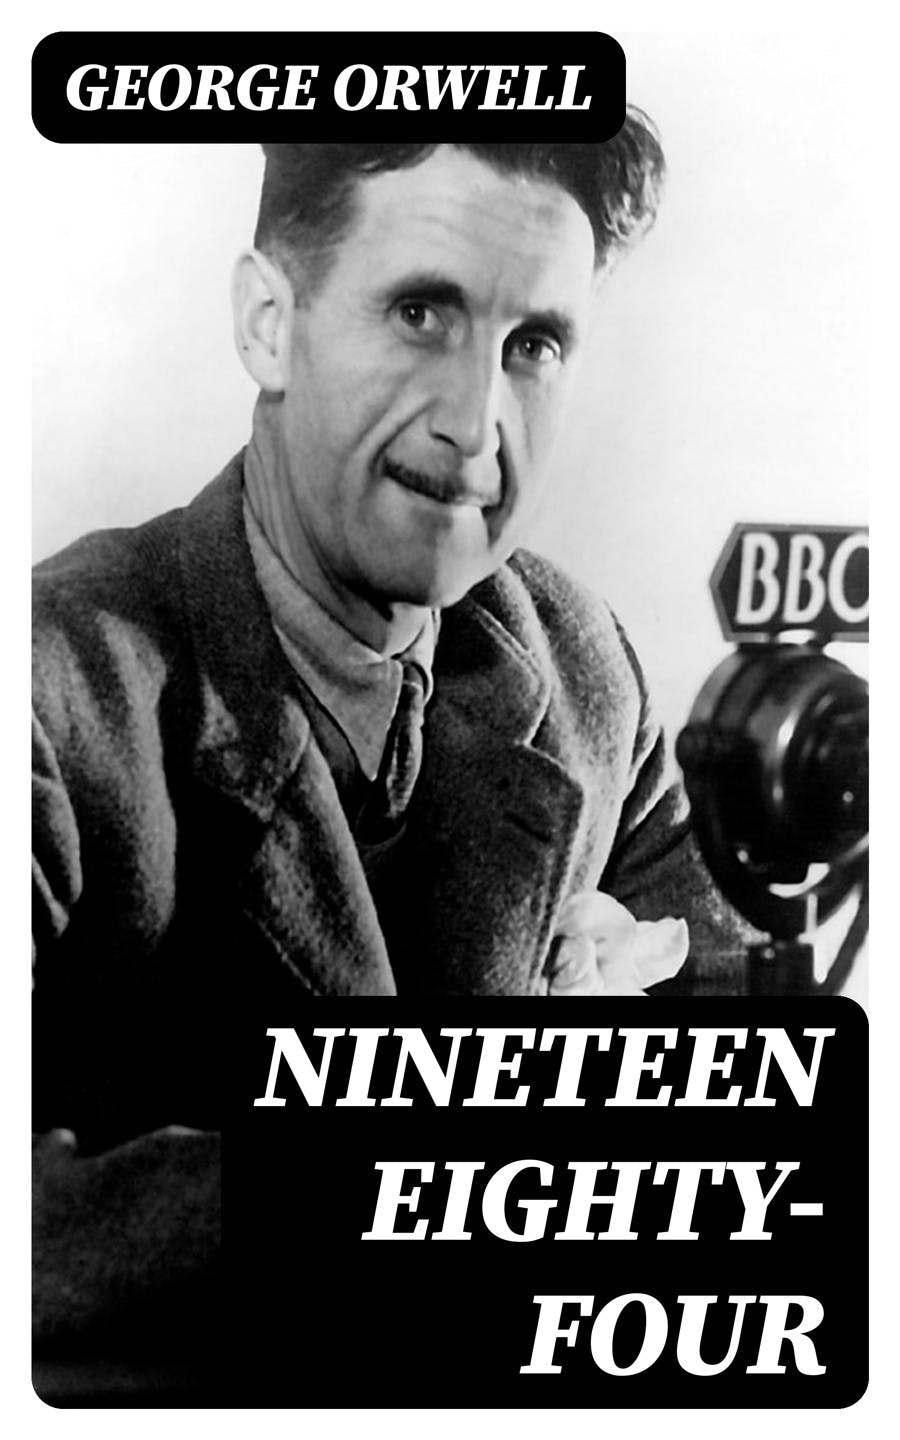 1984 by George Orwell: A Timeless Cautionary Tale